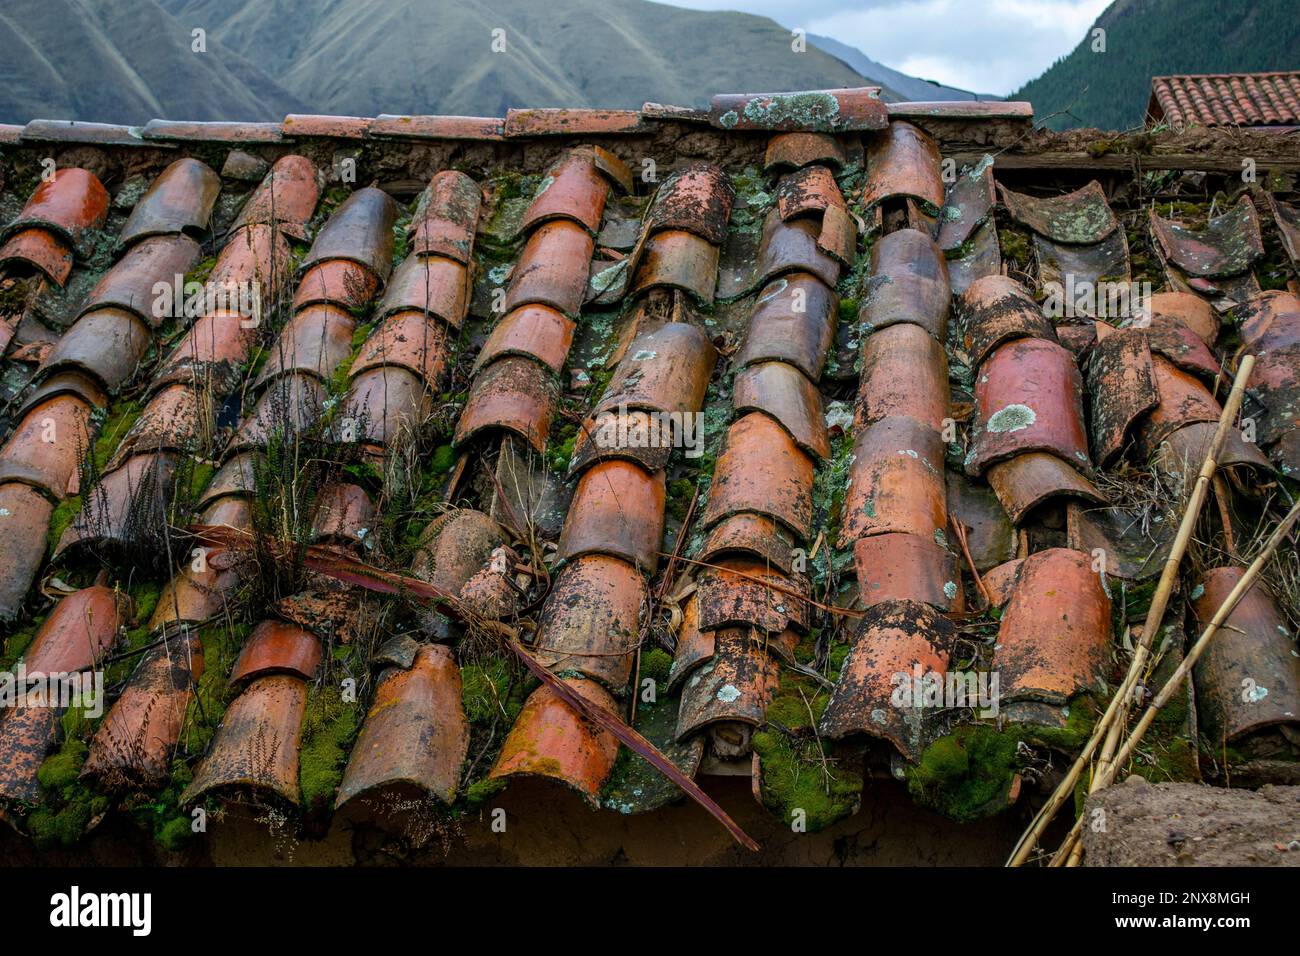 Old tiled roof of an abandoned house in a village in the Peruvian Andes. Stock Photo